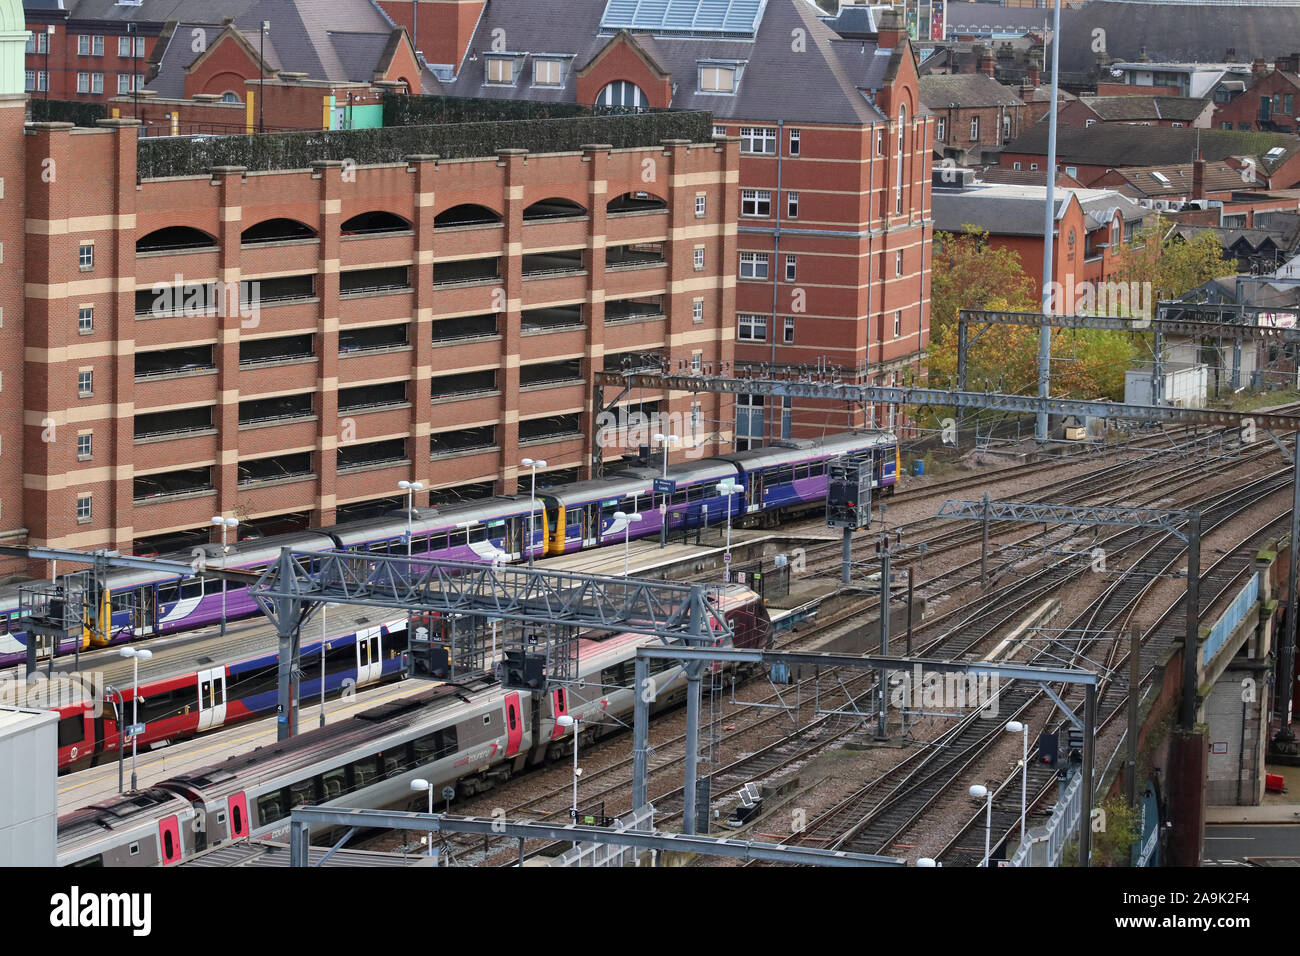 Northern and Cross Country emu, voyager and pacer trains at platforms in Leeds railway station at eastern side of station seen from above. Stock Photo